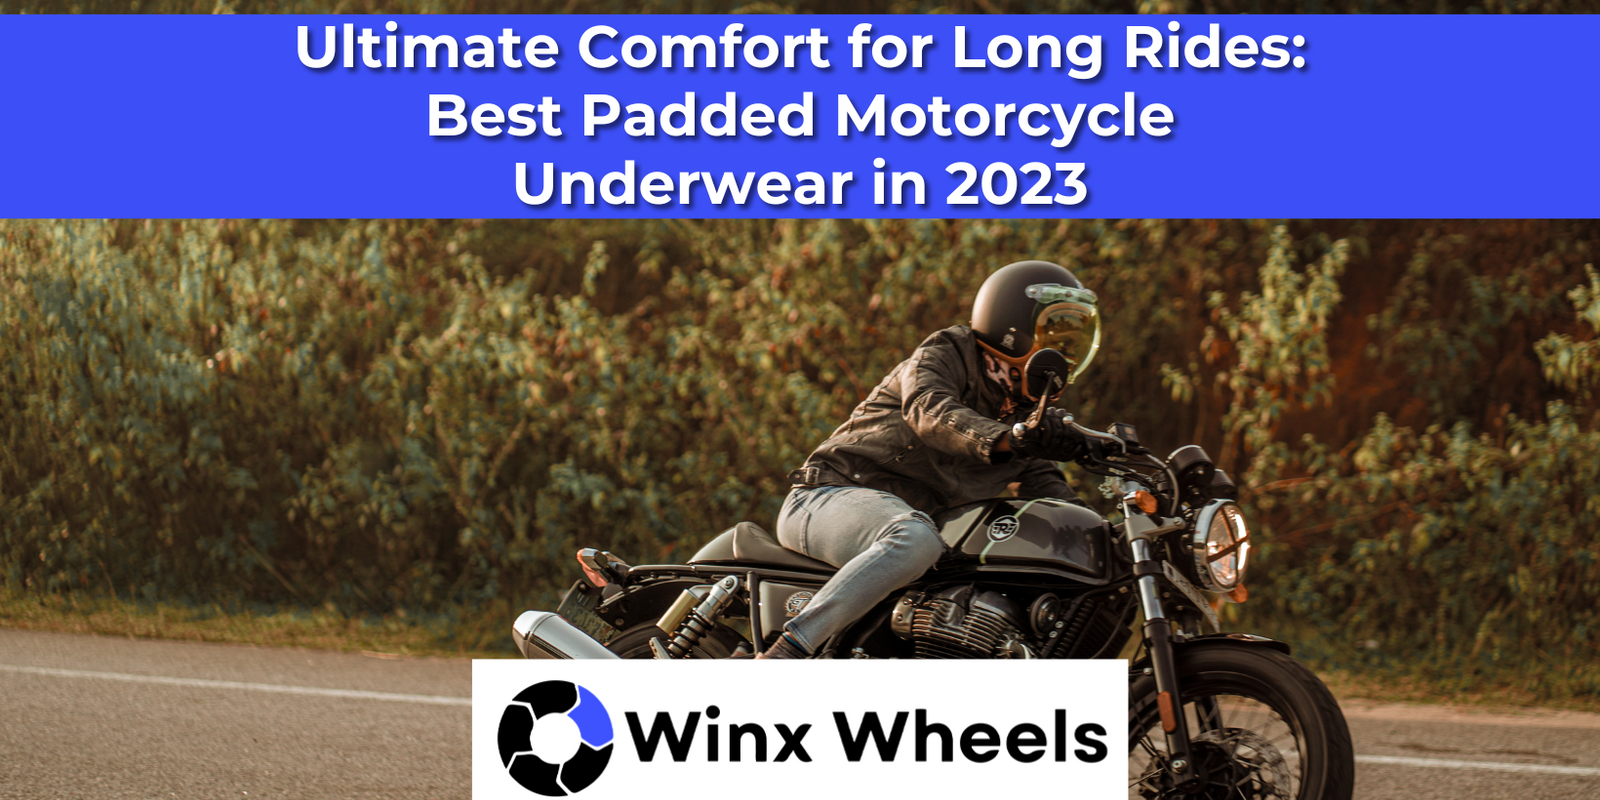 Ultimate Comfort for Long Rides: Best Padded Motorcycle Underwear in 2023